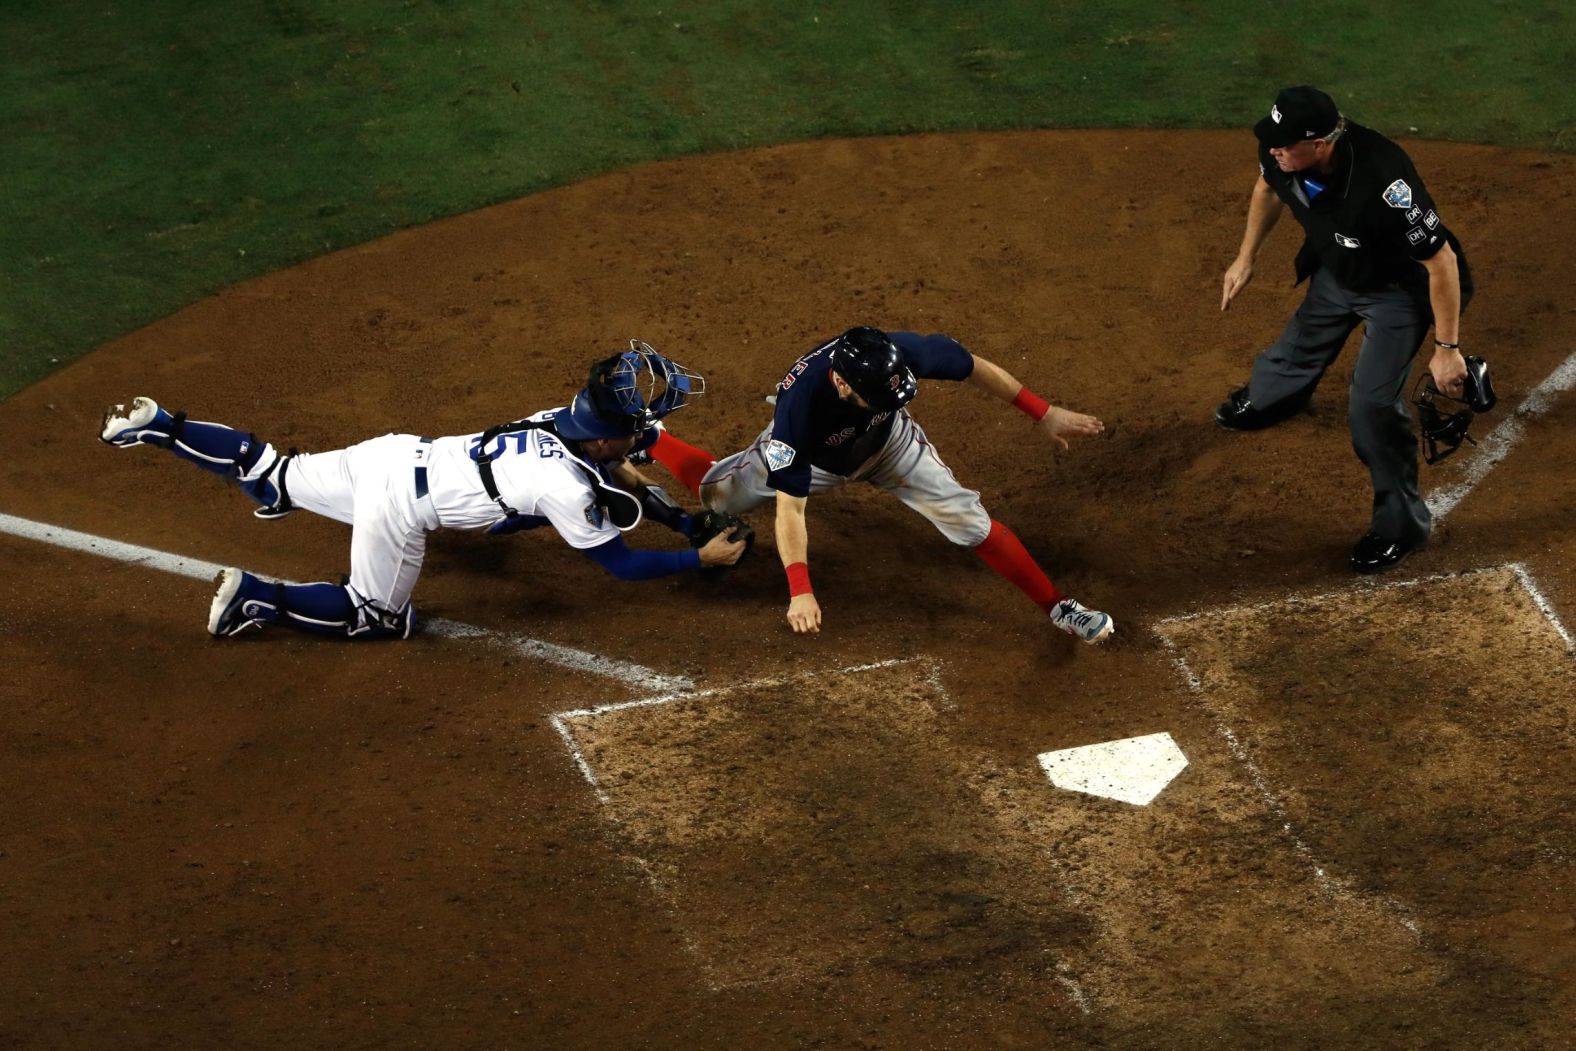 Ian Kinsler of the Red Sox is tagged out at home plate by Austin Barnes of the Dodgers on a throw from Cody Bellinger during the 10th inning of Game 3. The  Dodgers won in the 18th inning of a game that set the record as the longest in World Series history.